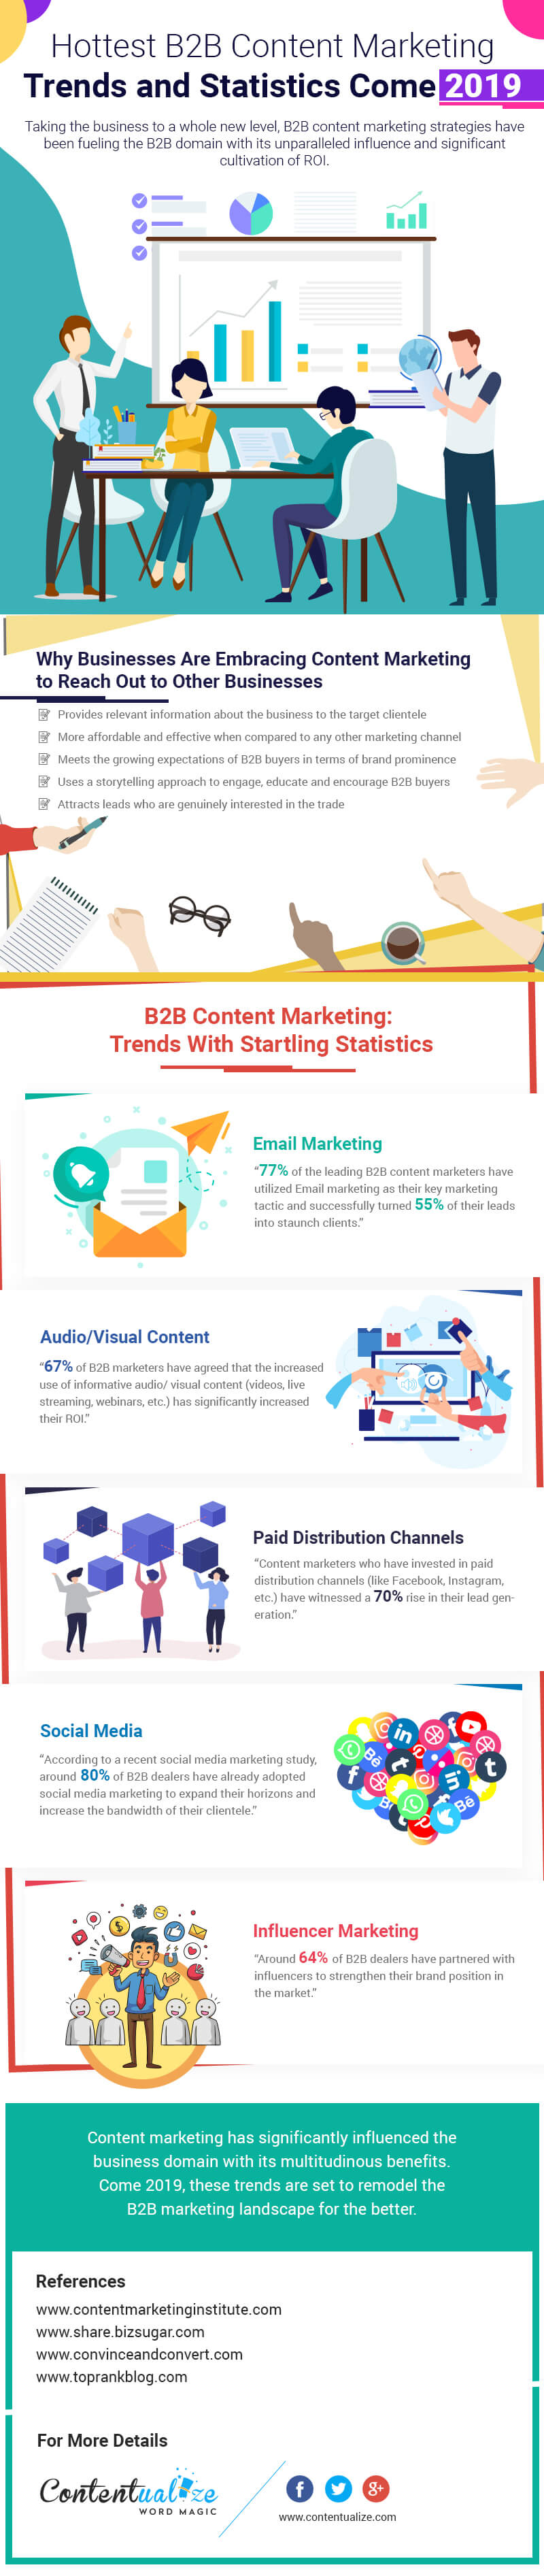 Hottest-B2B-Content-Marketing-Trends-and-Statistics